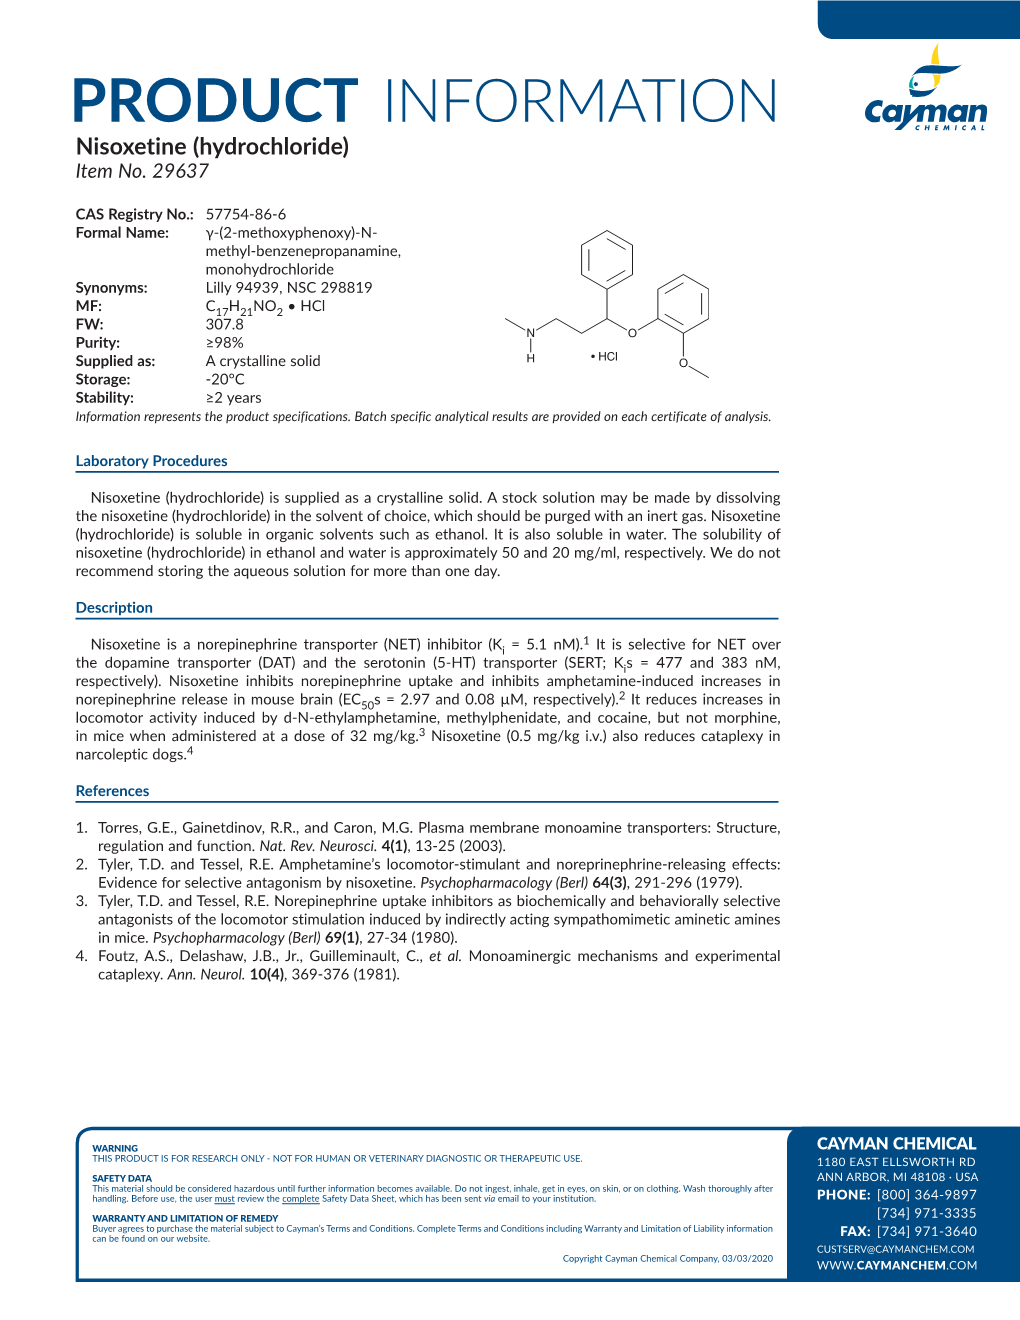 PRODUCT INFORMATION Nisoxetine (Hydrochloride) Item No